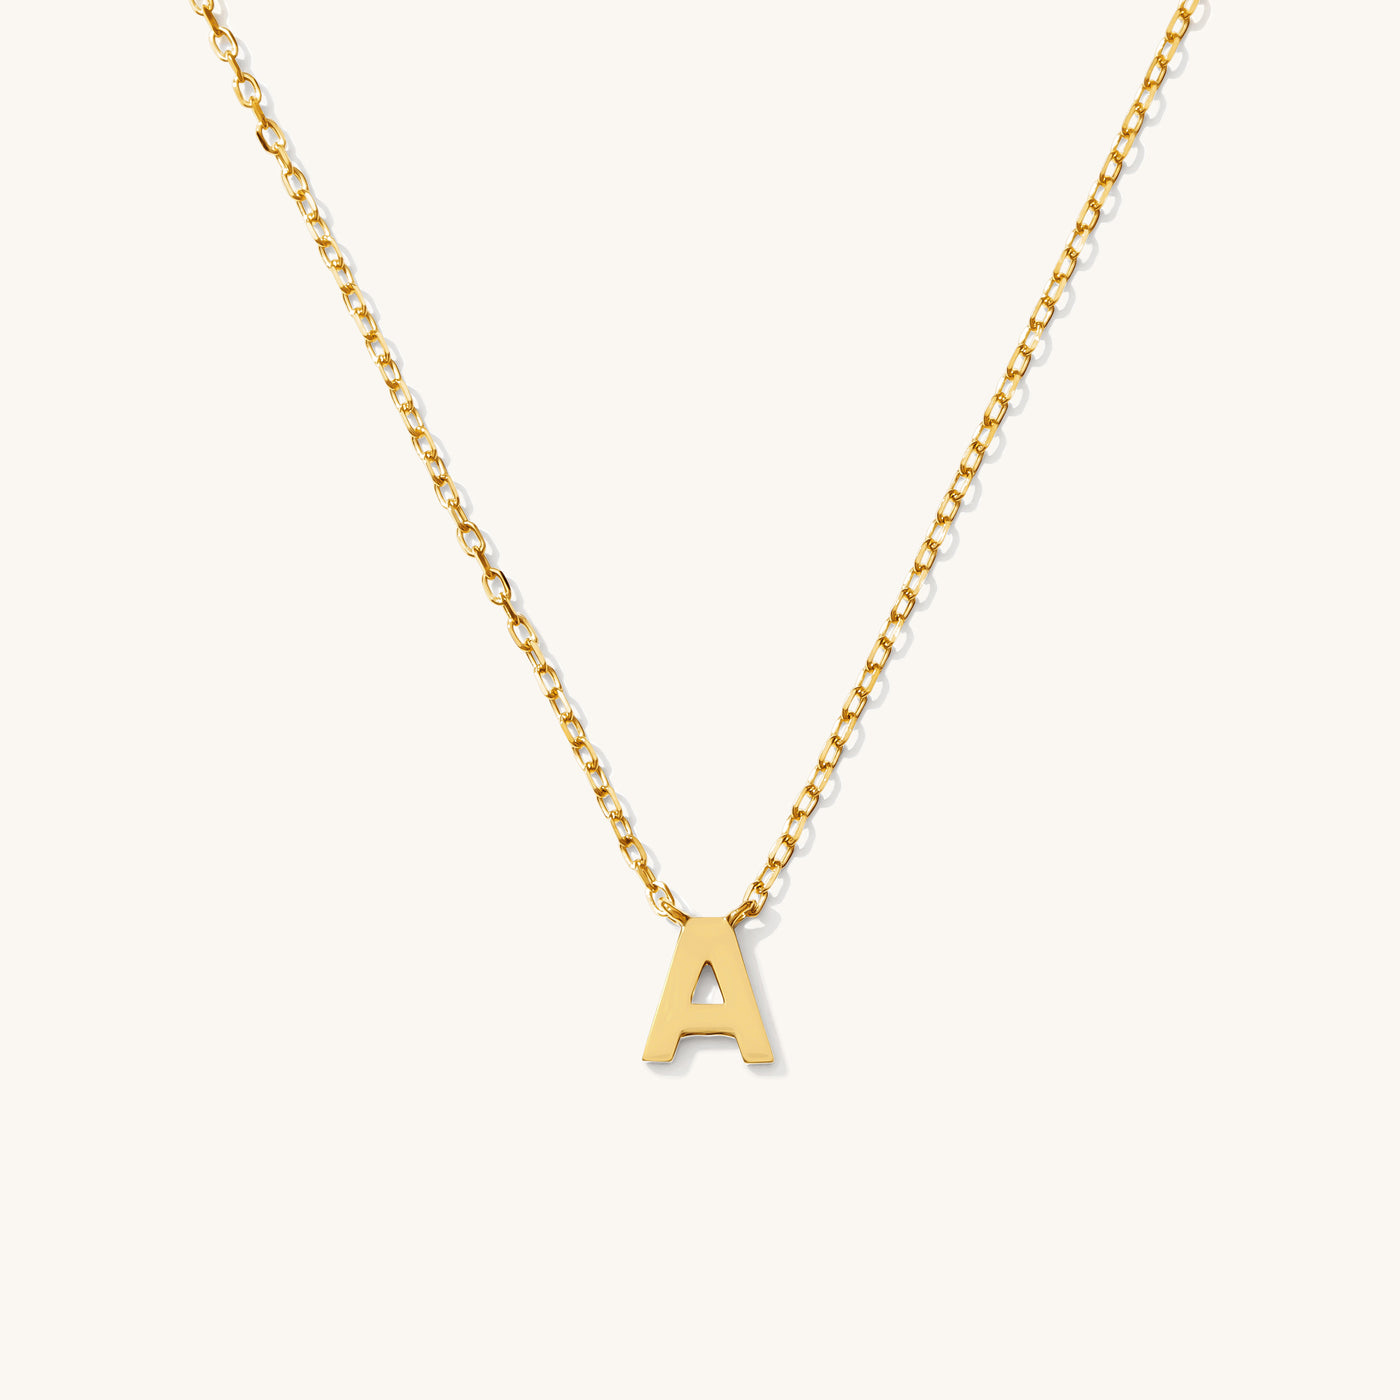 A Tiny Initial Necklace - 14k Solid Gold